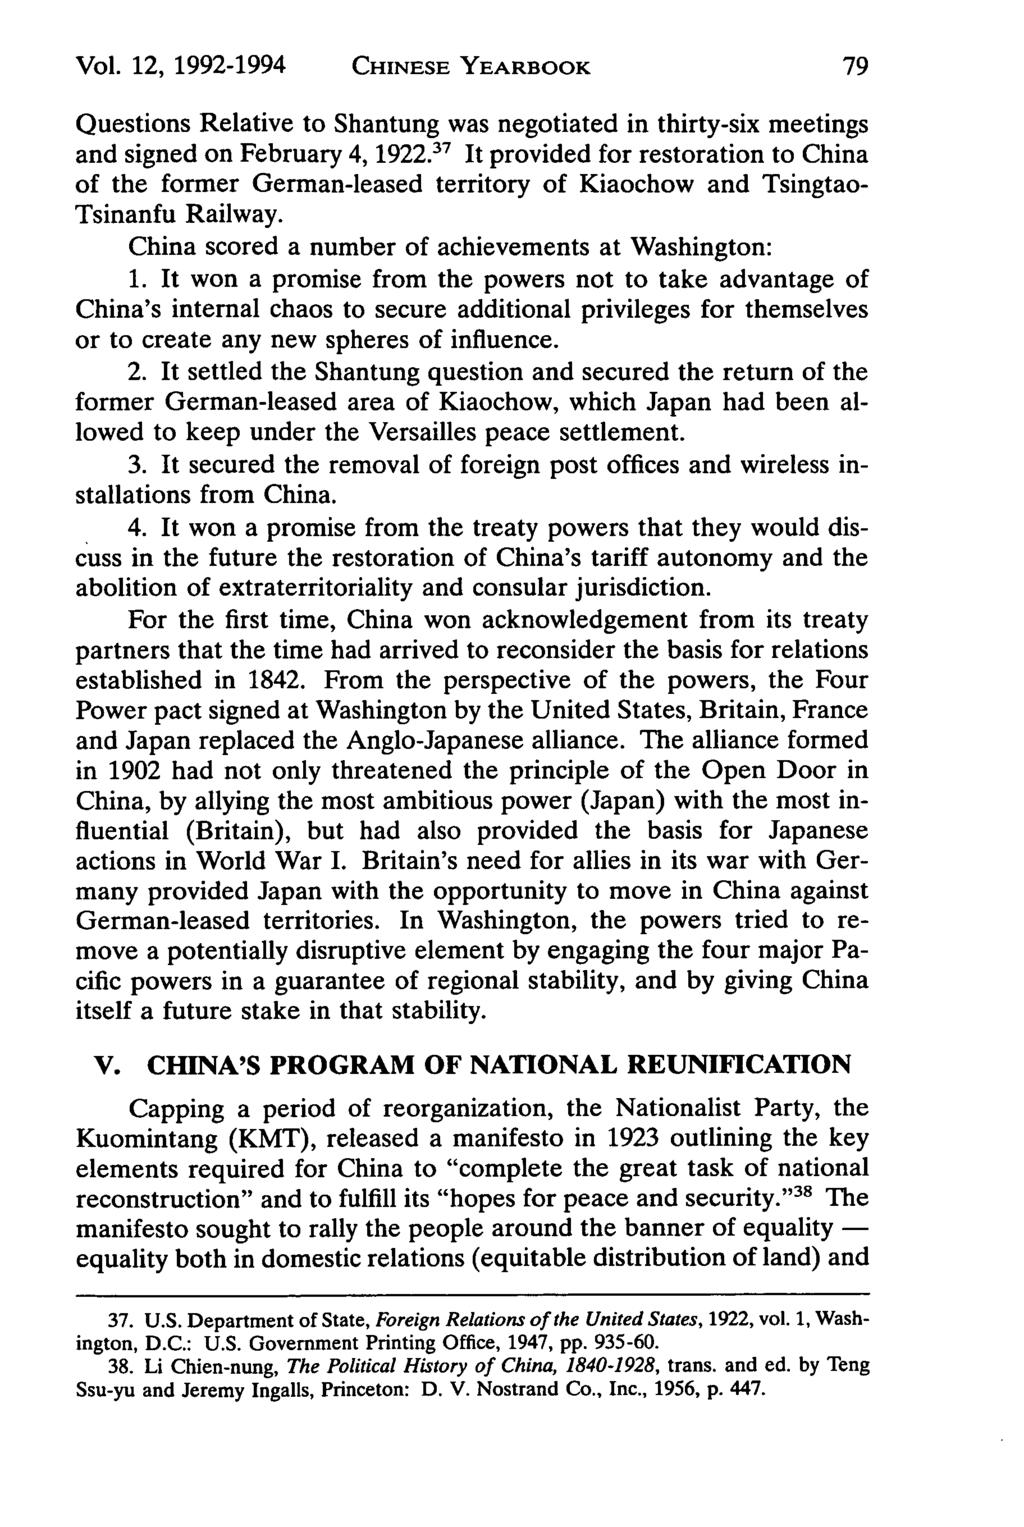 Vol. 12, 1992-1994 CHINESE YEARBOOK Questions Relative to Shantung was negotiated in thirty-six meetings and signed on February 4, 1922.